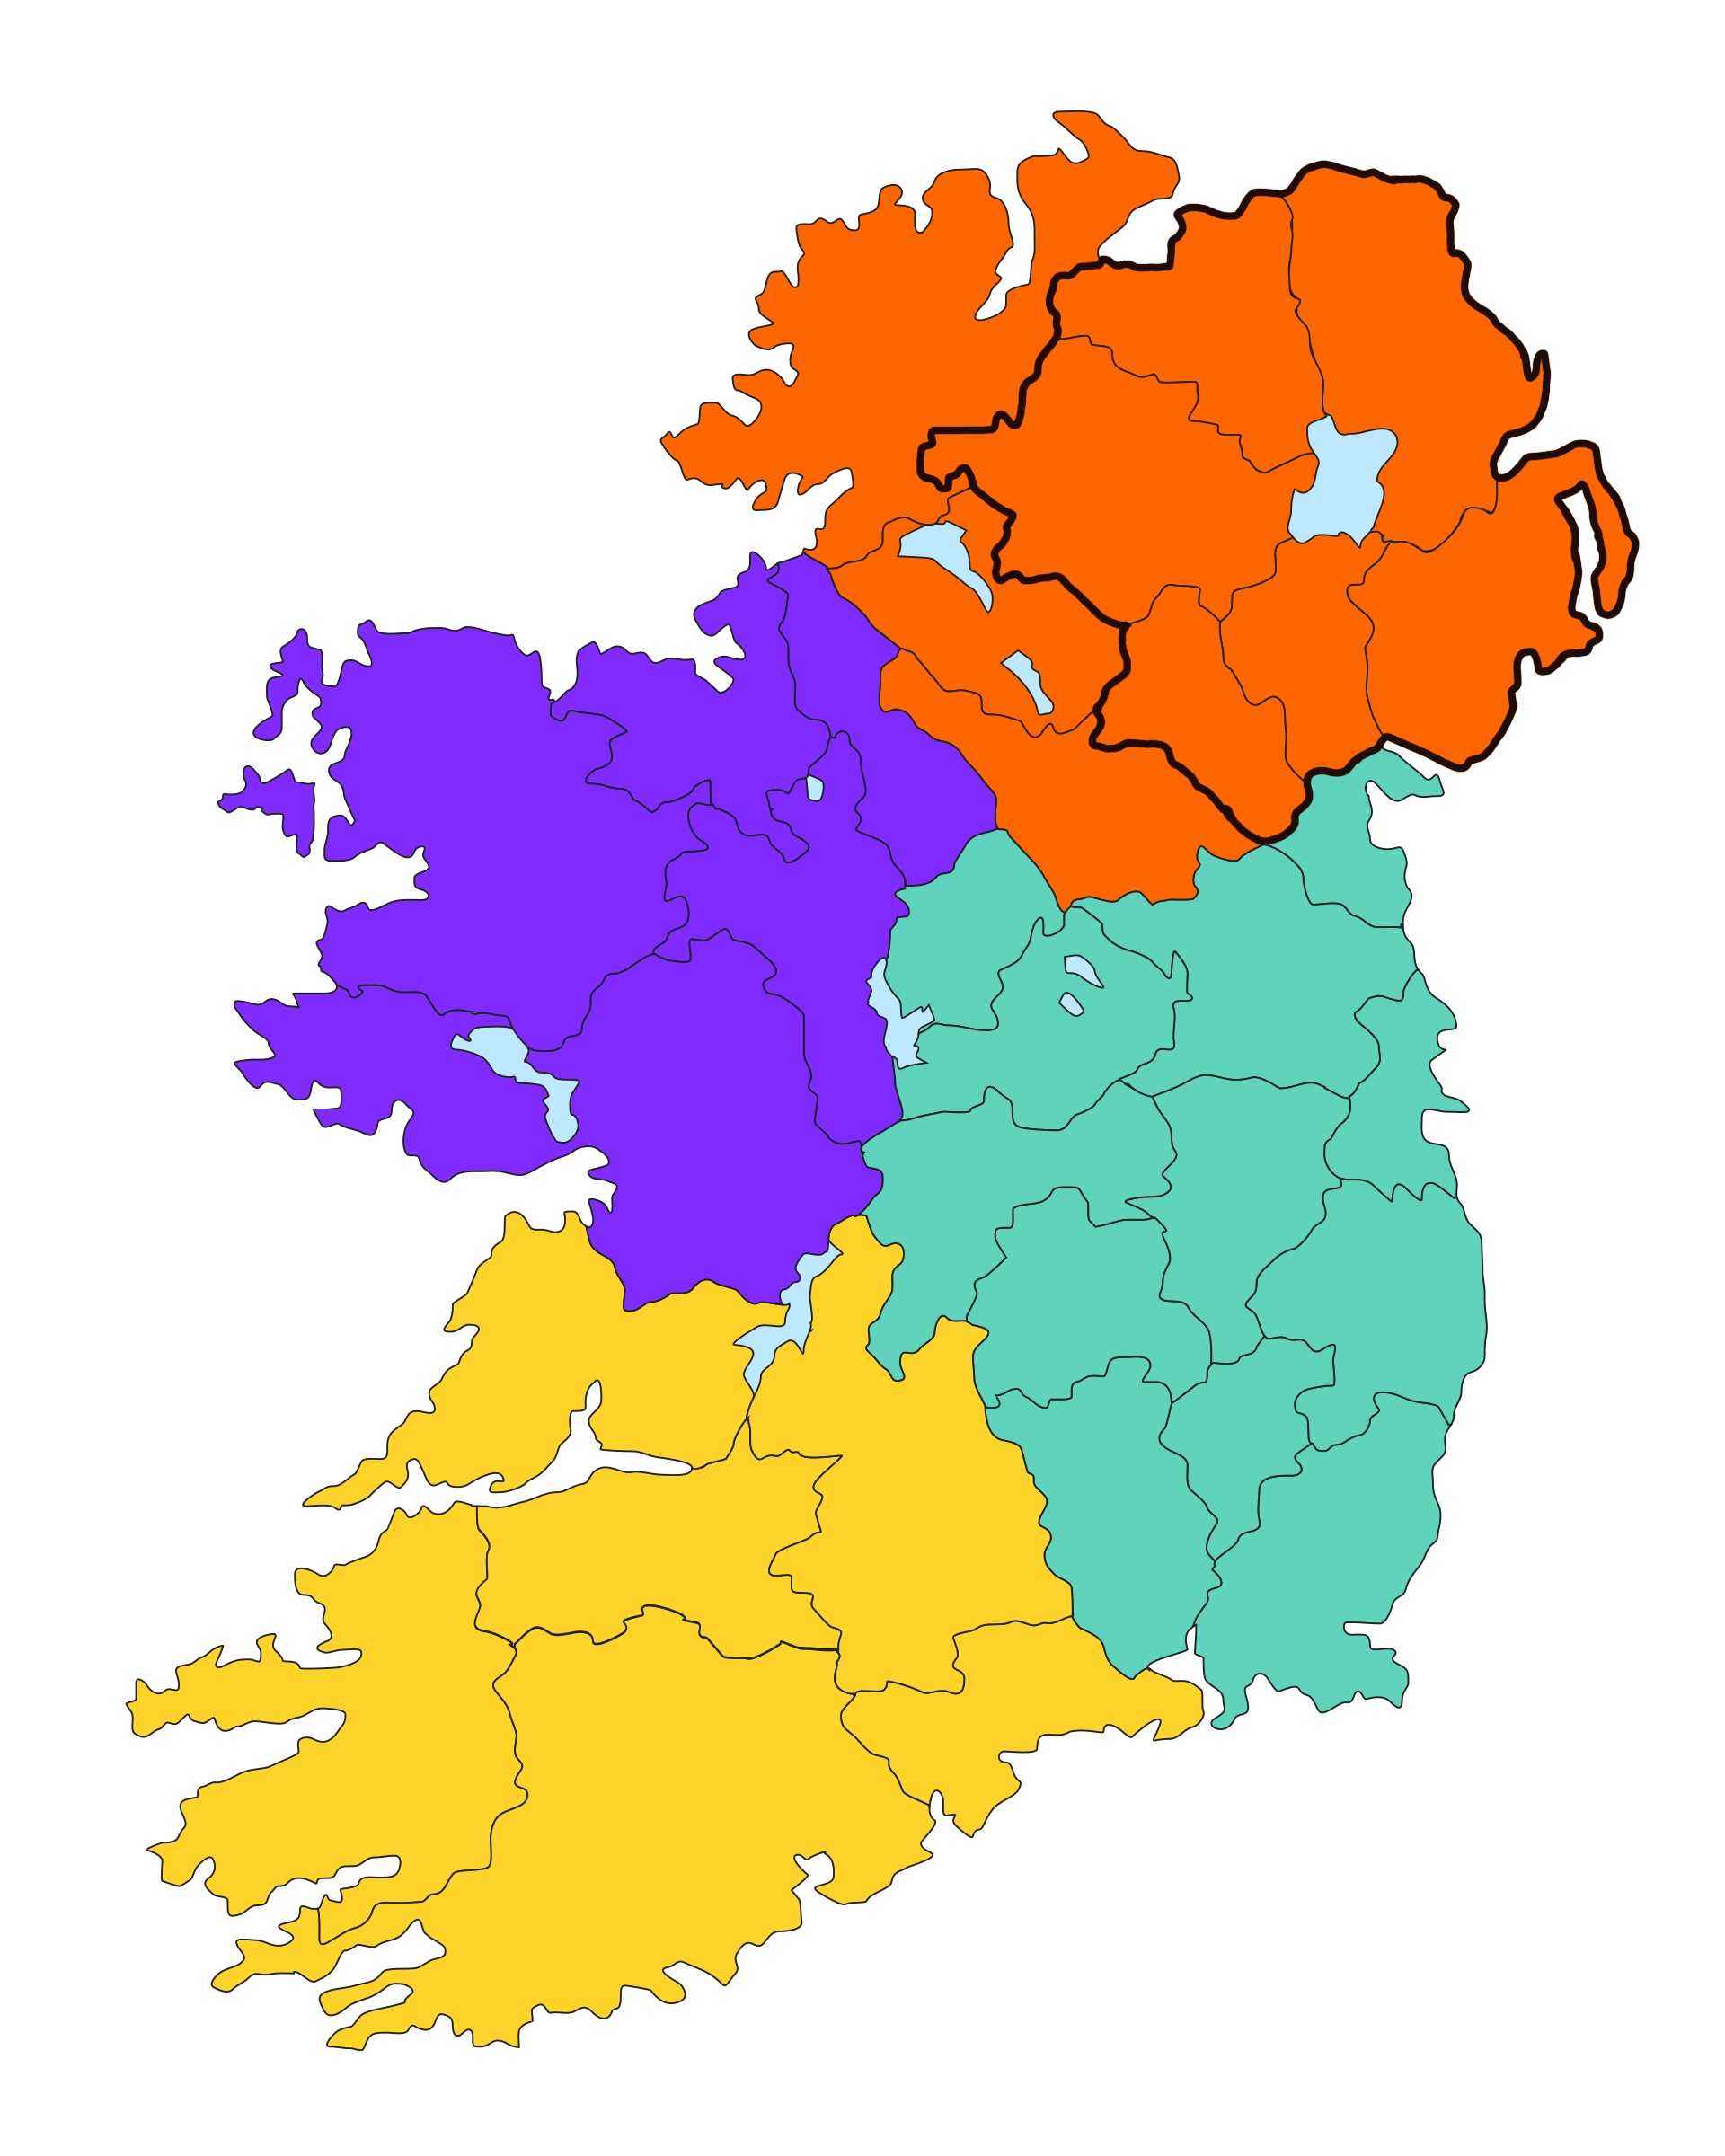 Map of four provinces of Ireland and Northern Ireland.